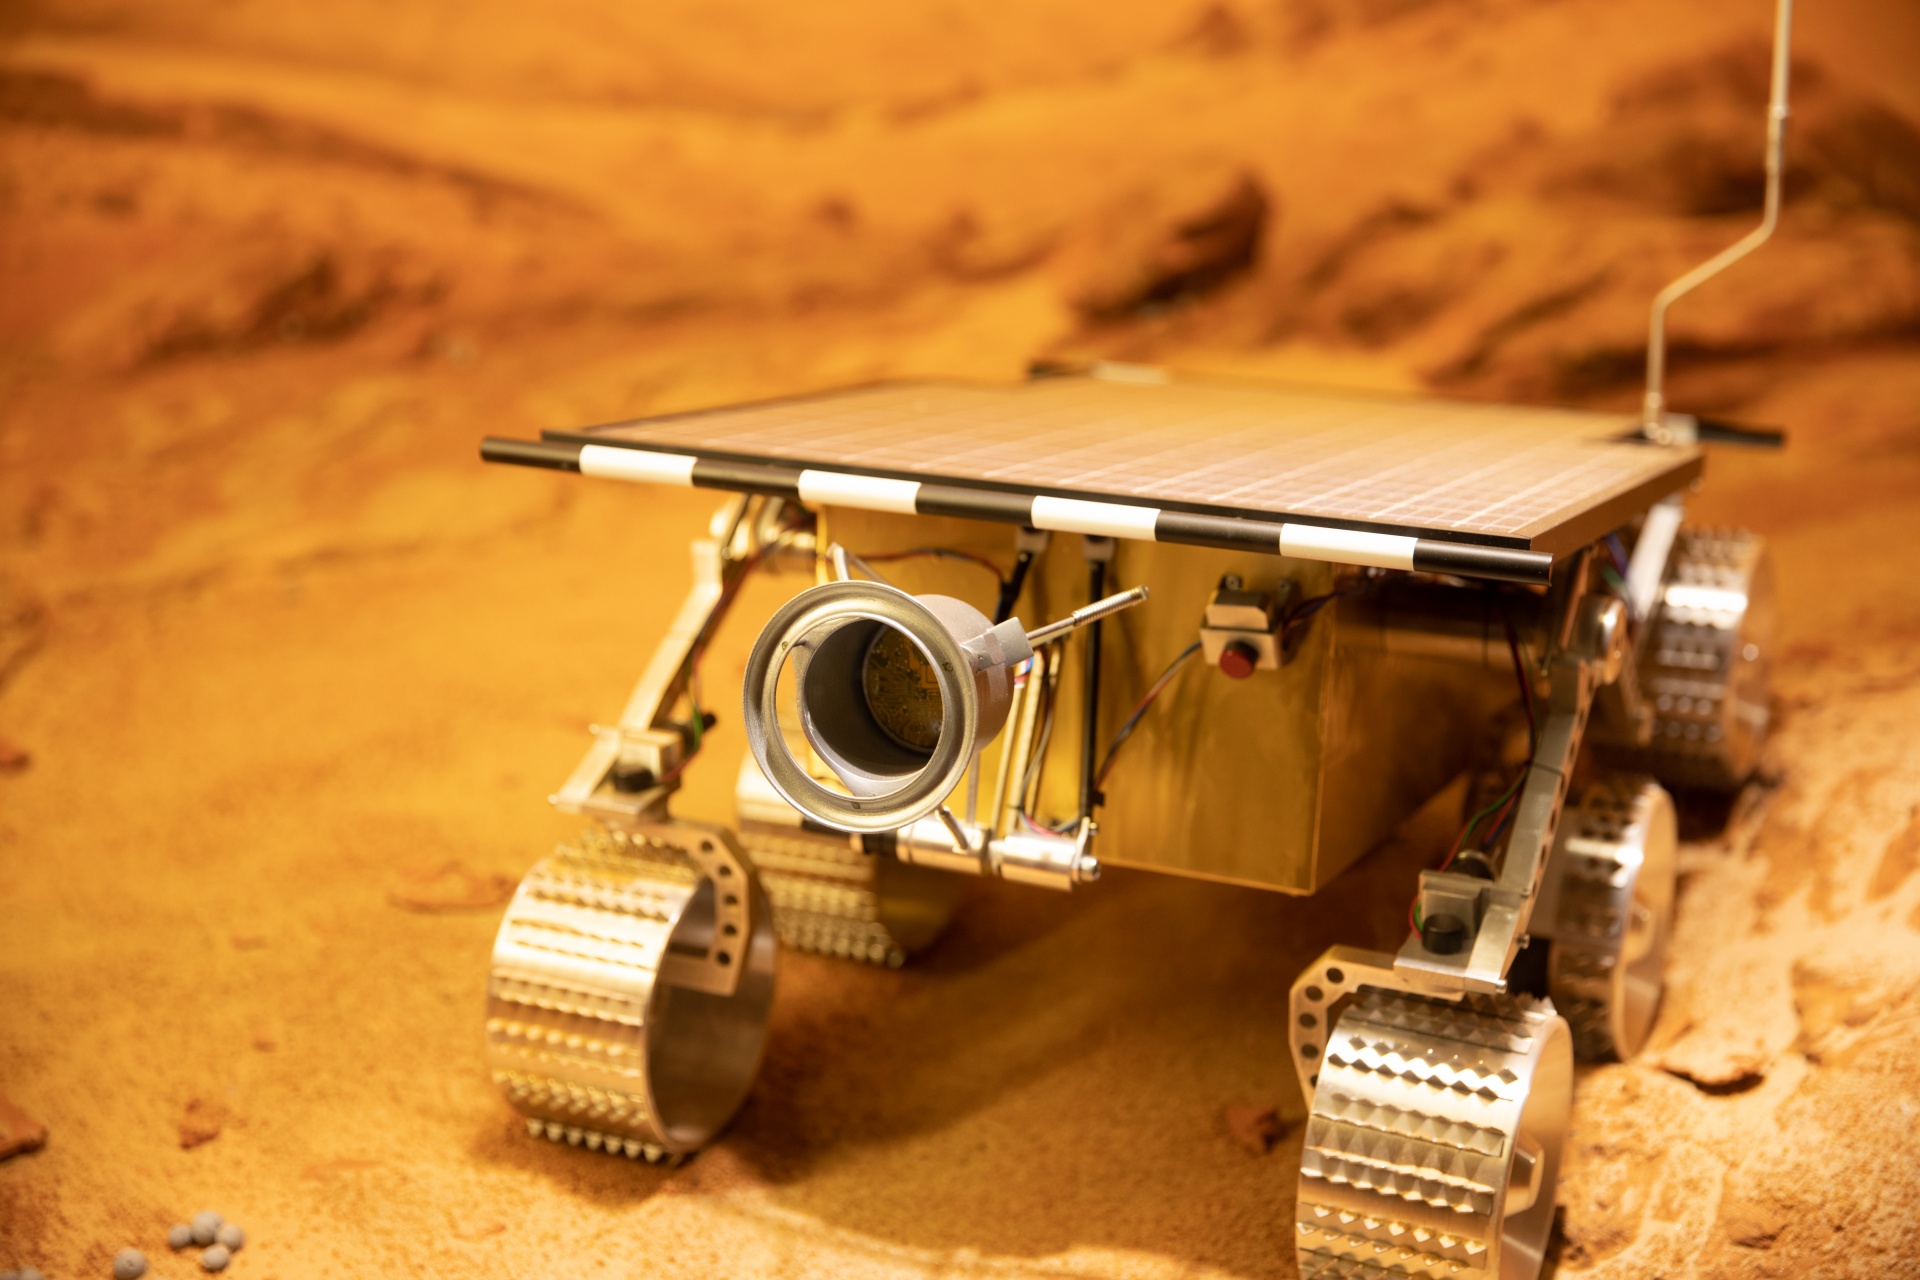 Small Mars rover with a solar panel on the top